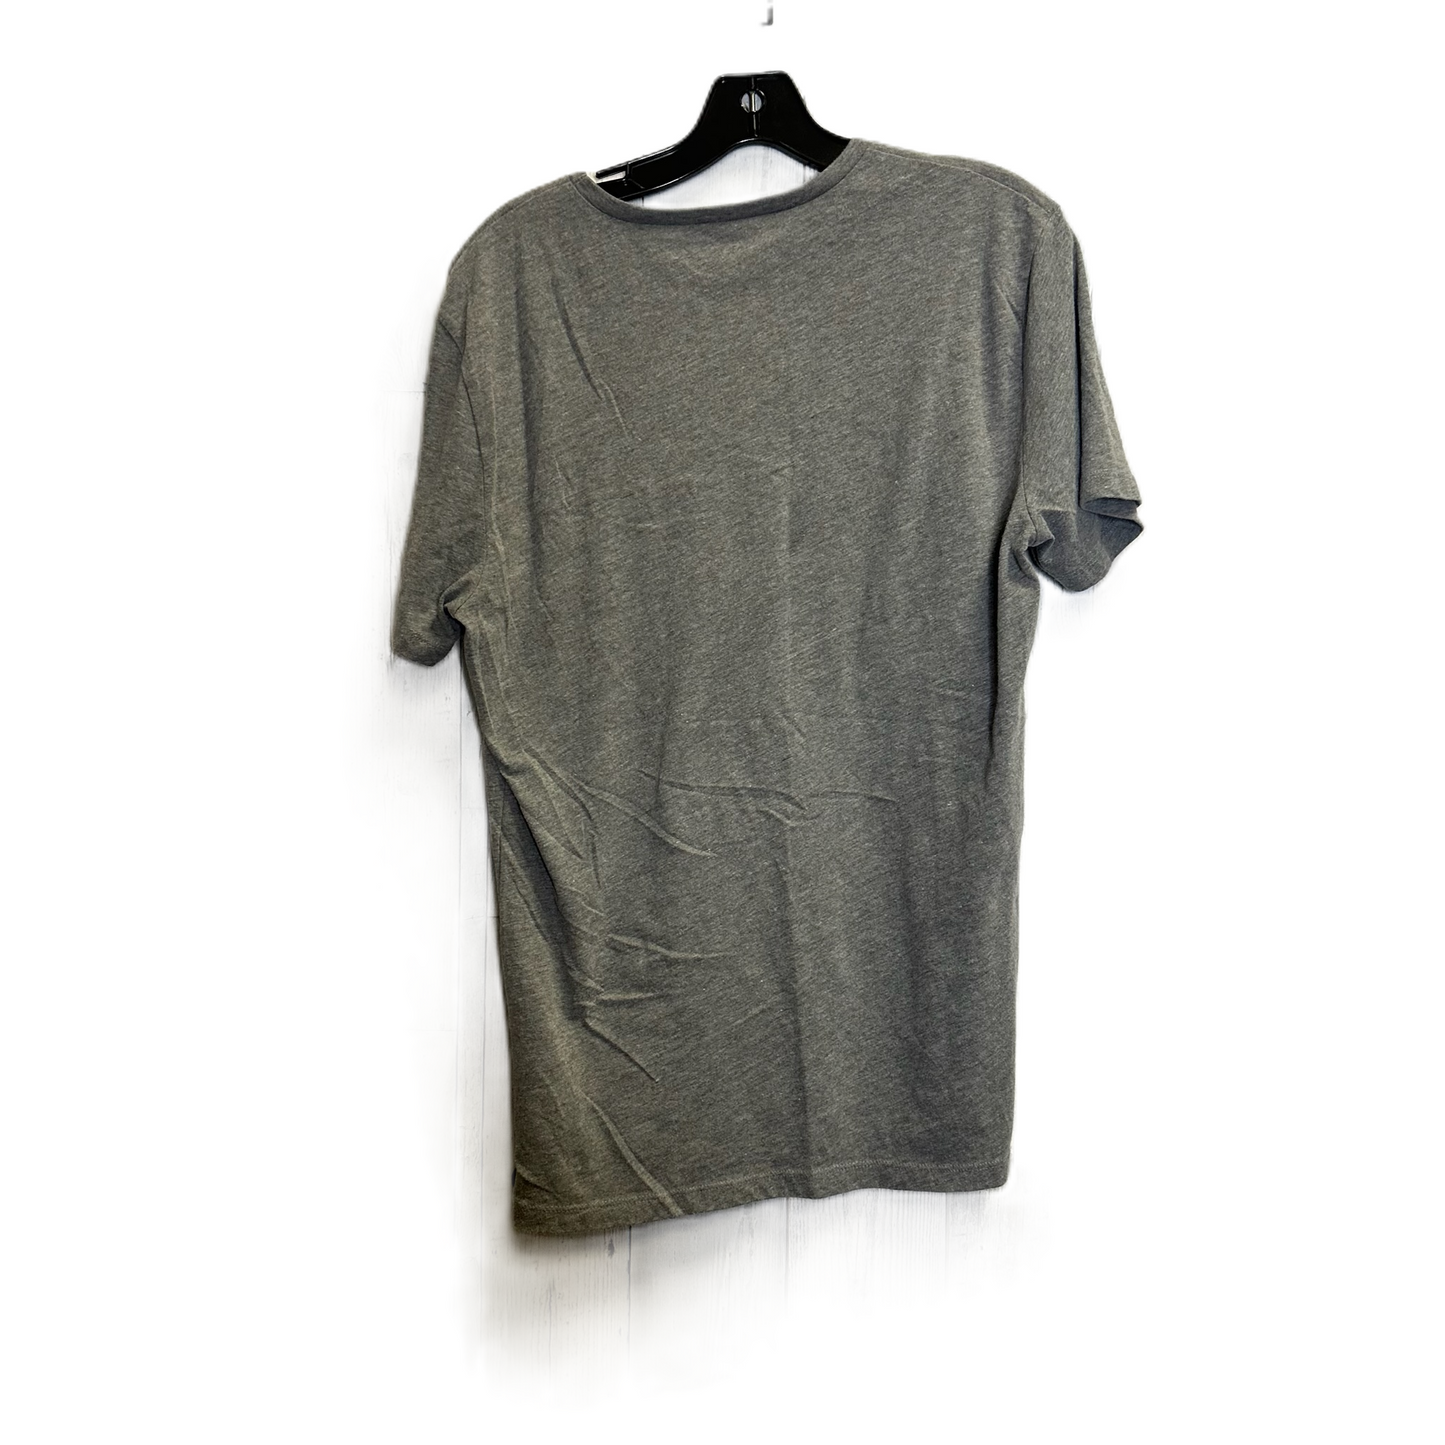 Grey Top Short Sleeve Basic By Old Navy, Size: M